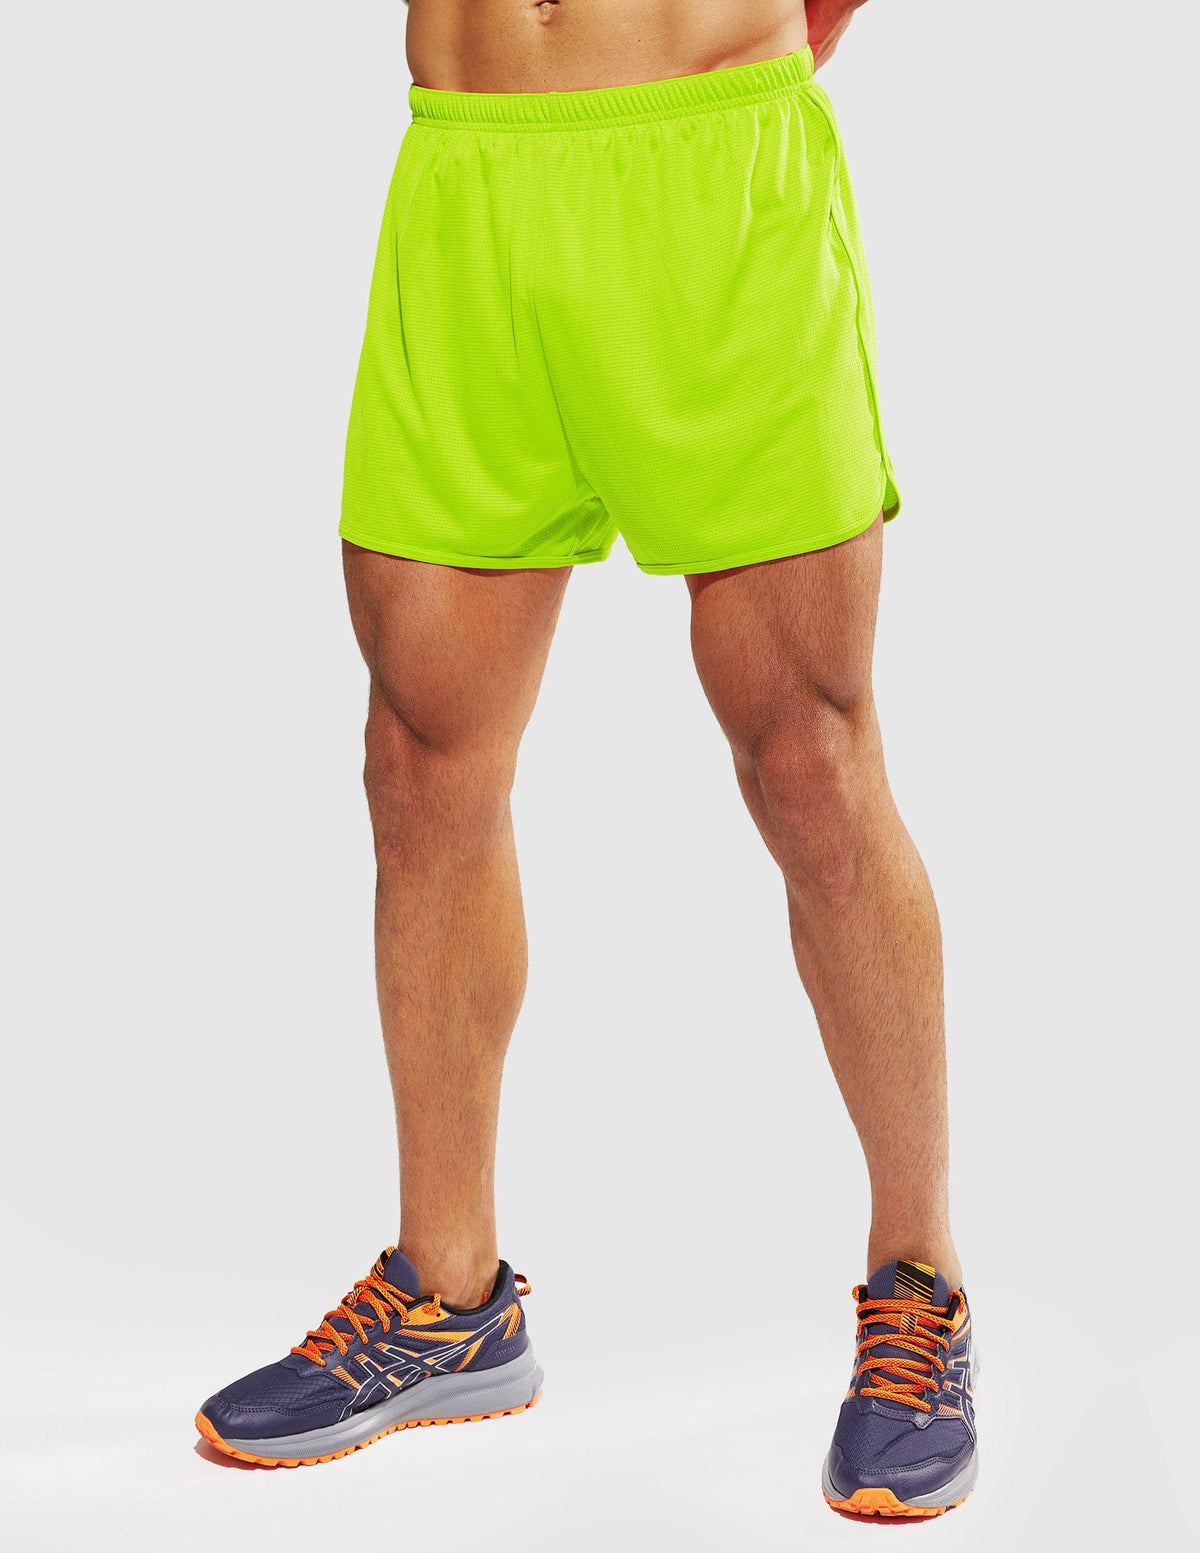 Men's 3-Inch Quick Dry Running Shorts with Liner Men's Shorts Lemon Green / XS MIER